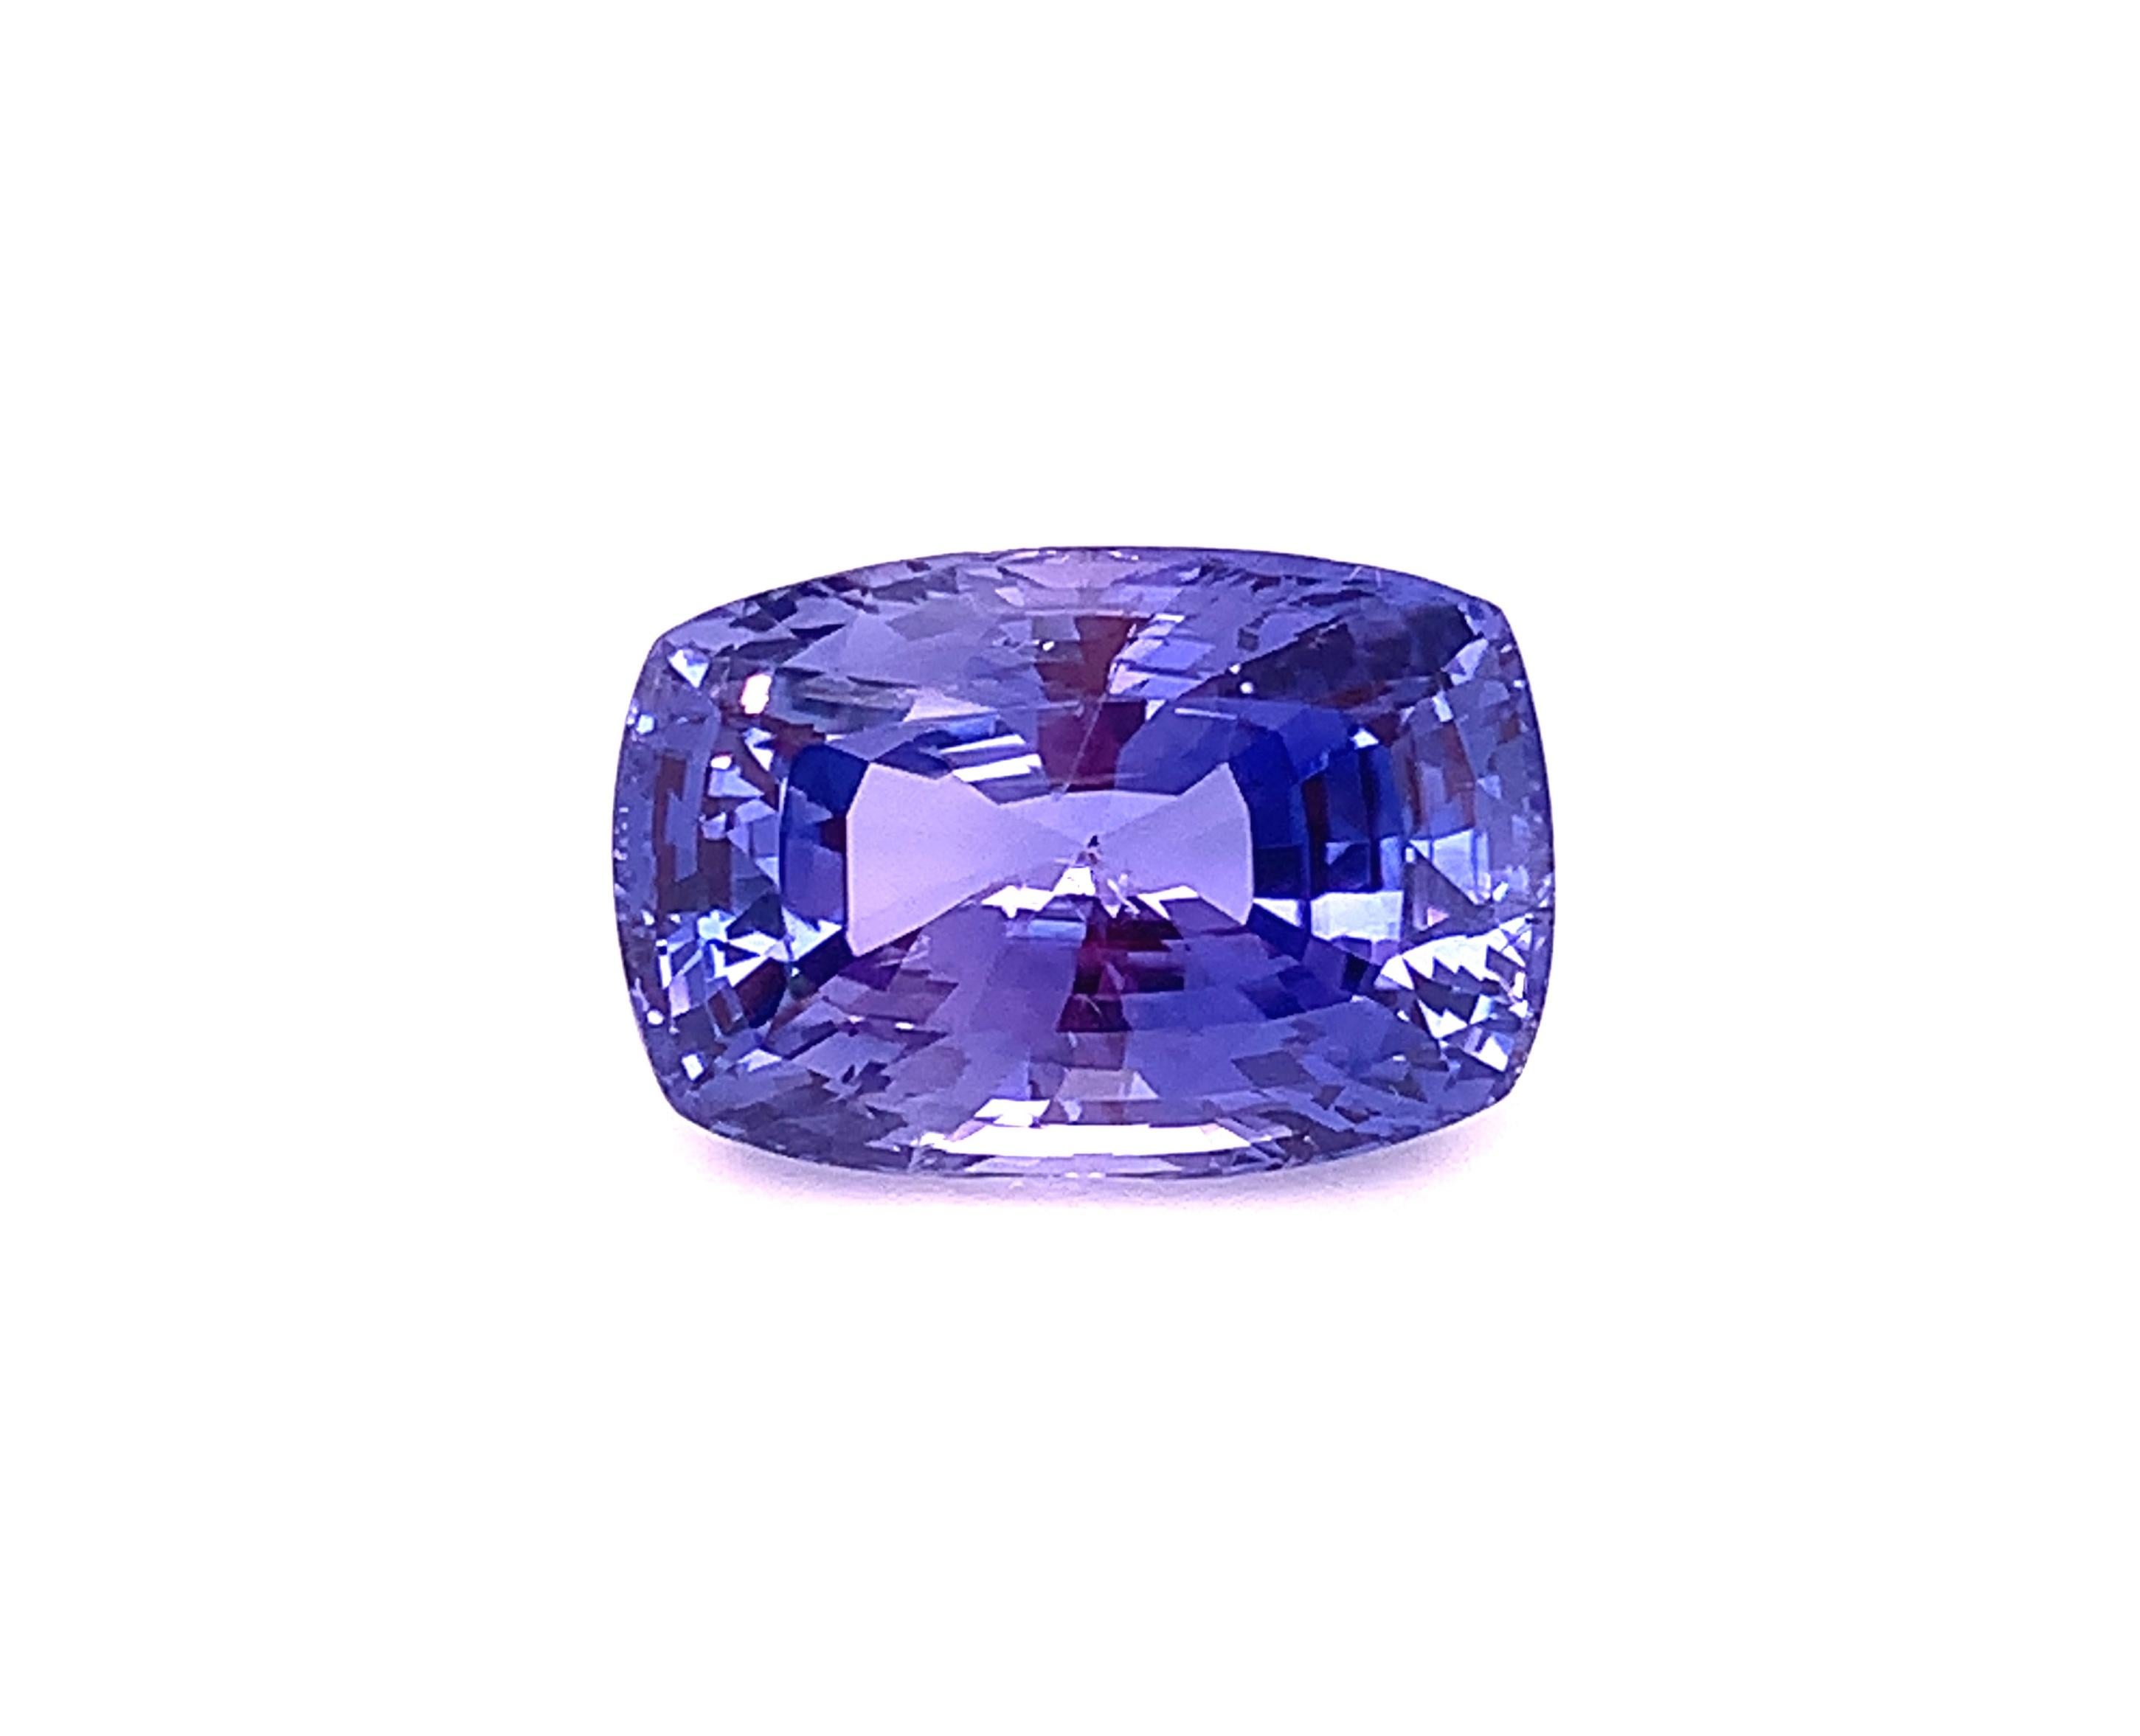 Women's or Men's Unheated 29.45 Carat Blue Violet Sapphire, Loose Gemstone, GIA Certified